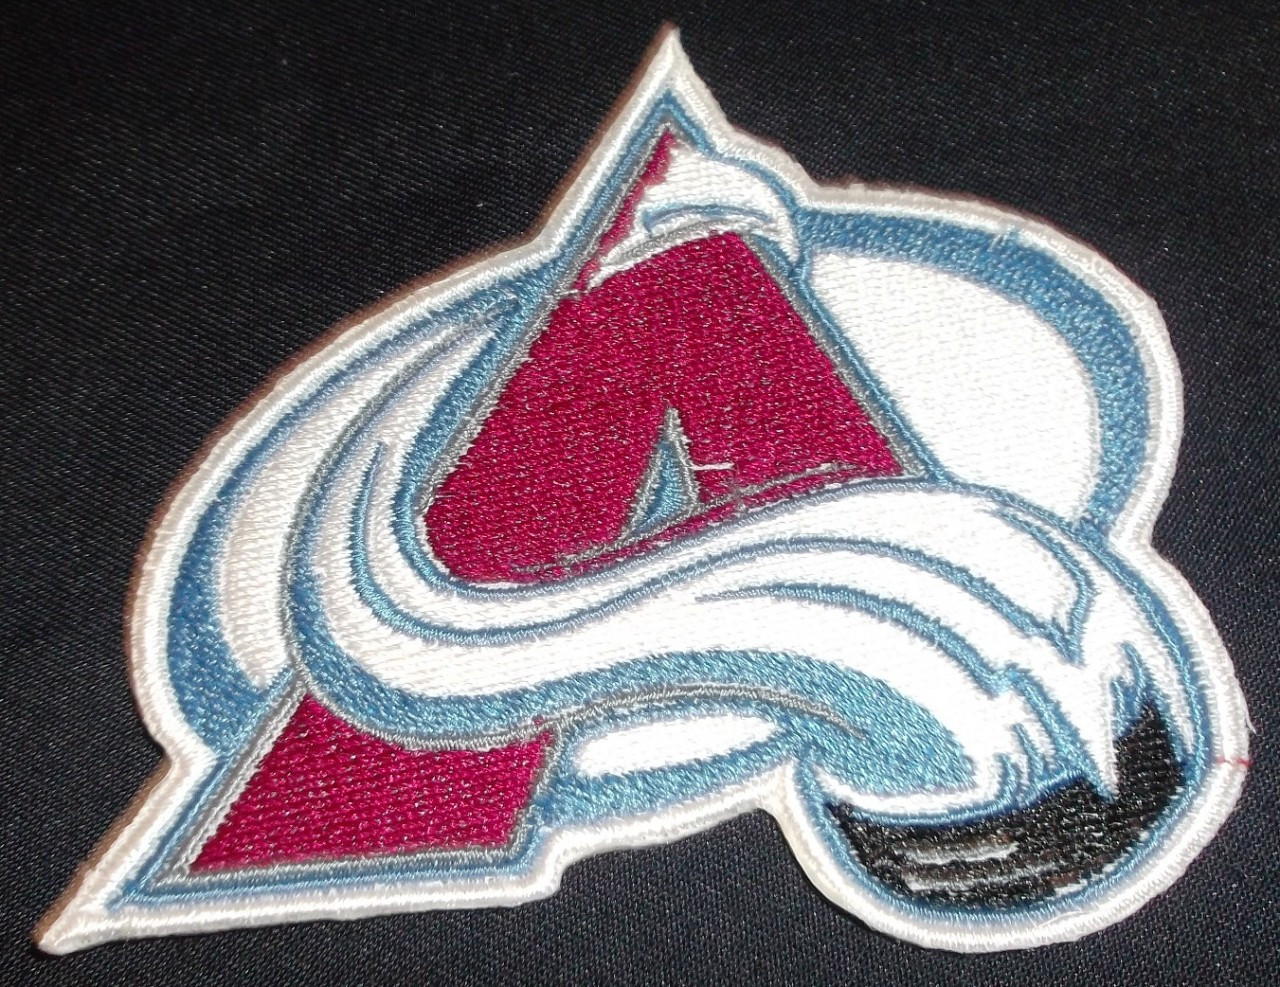 National Emblem Colorado Avalanche Throwback Old Primary Team Logo  Patch,Red,4.5 inch widex3.75 inch tall